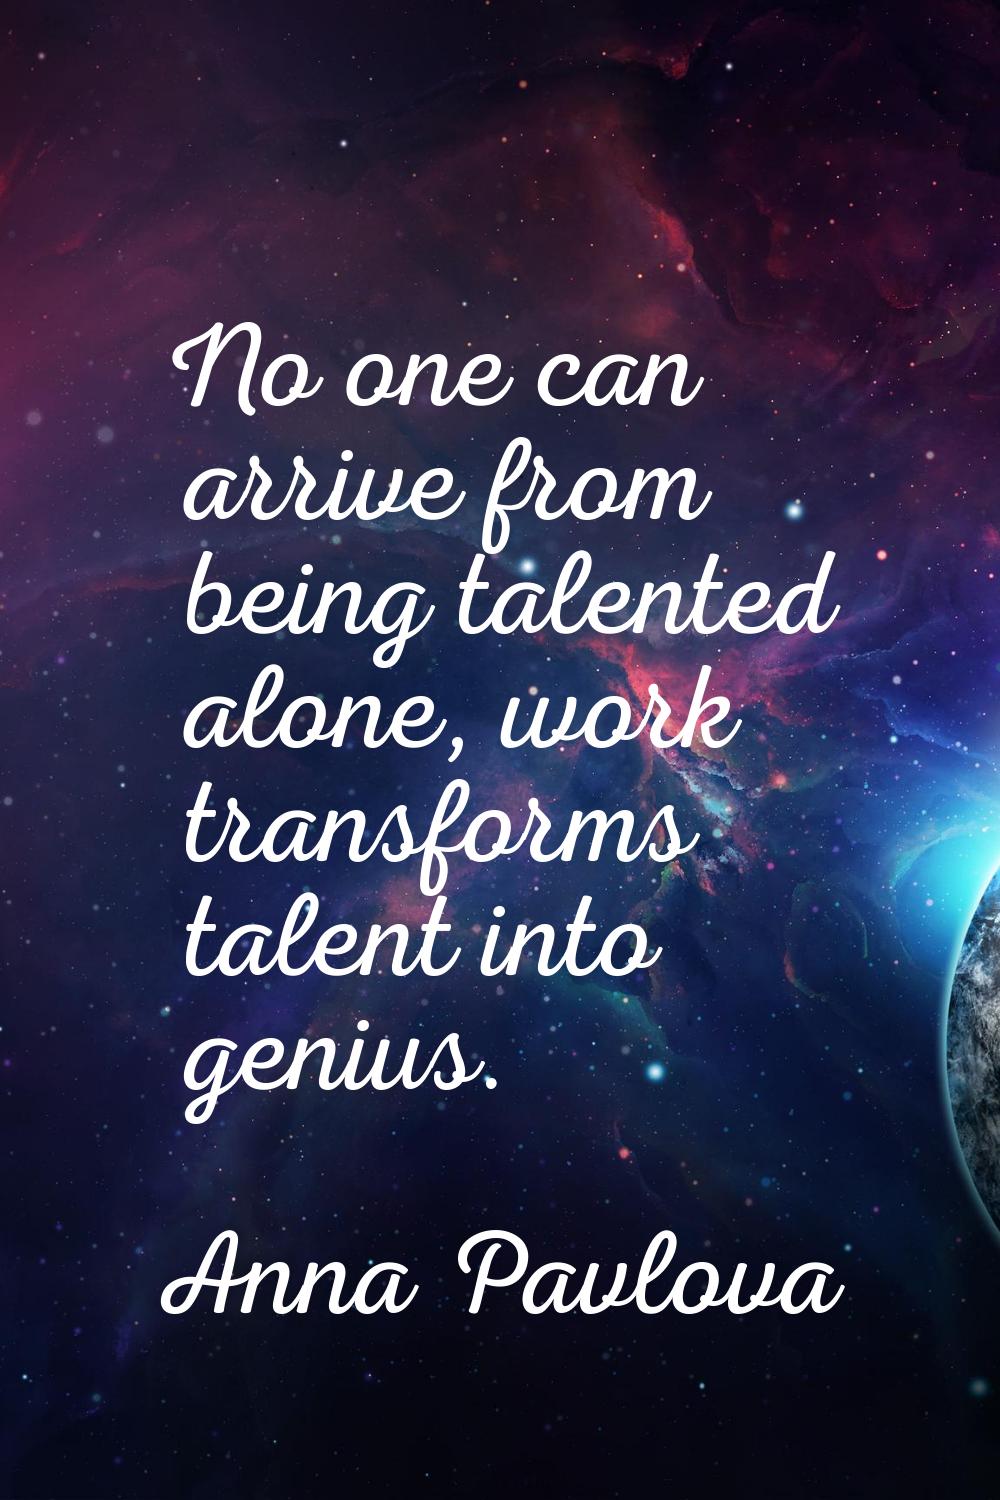 No one can arrive from being talented alone, work transforms talent into genius.